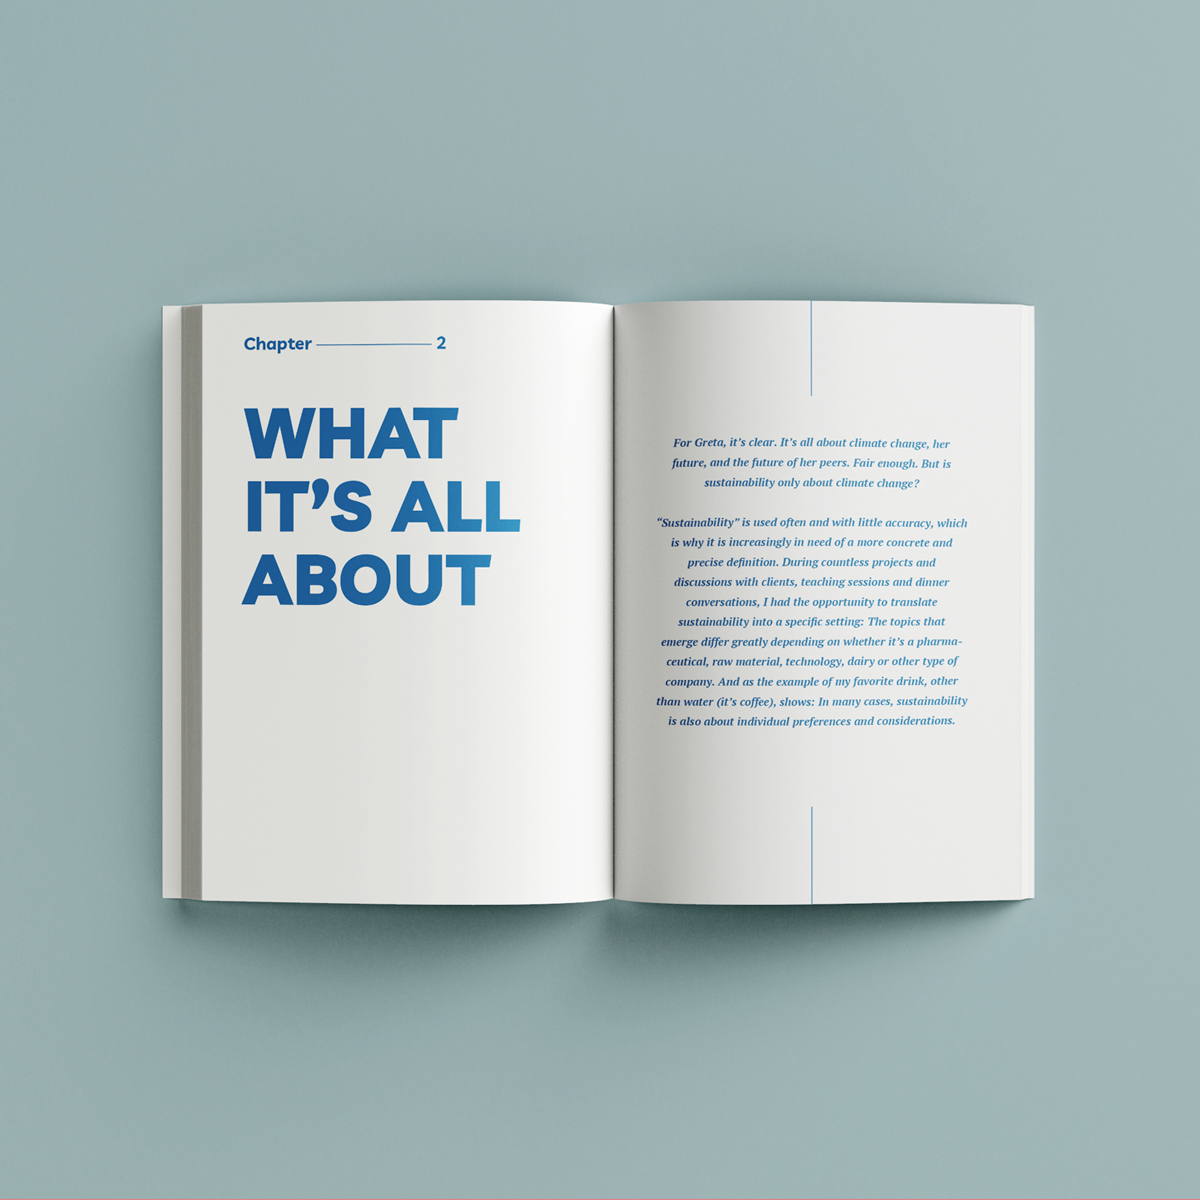 Book insights - chaper 2 “What it´s all about.“